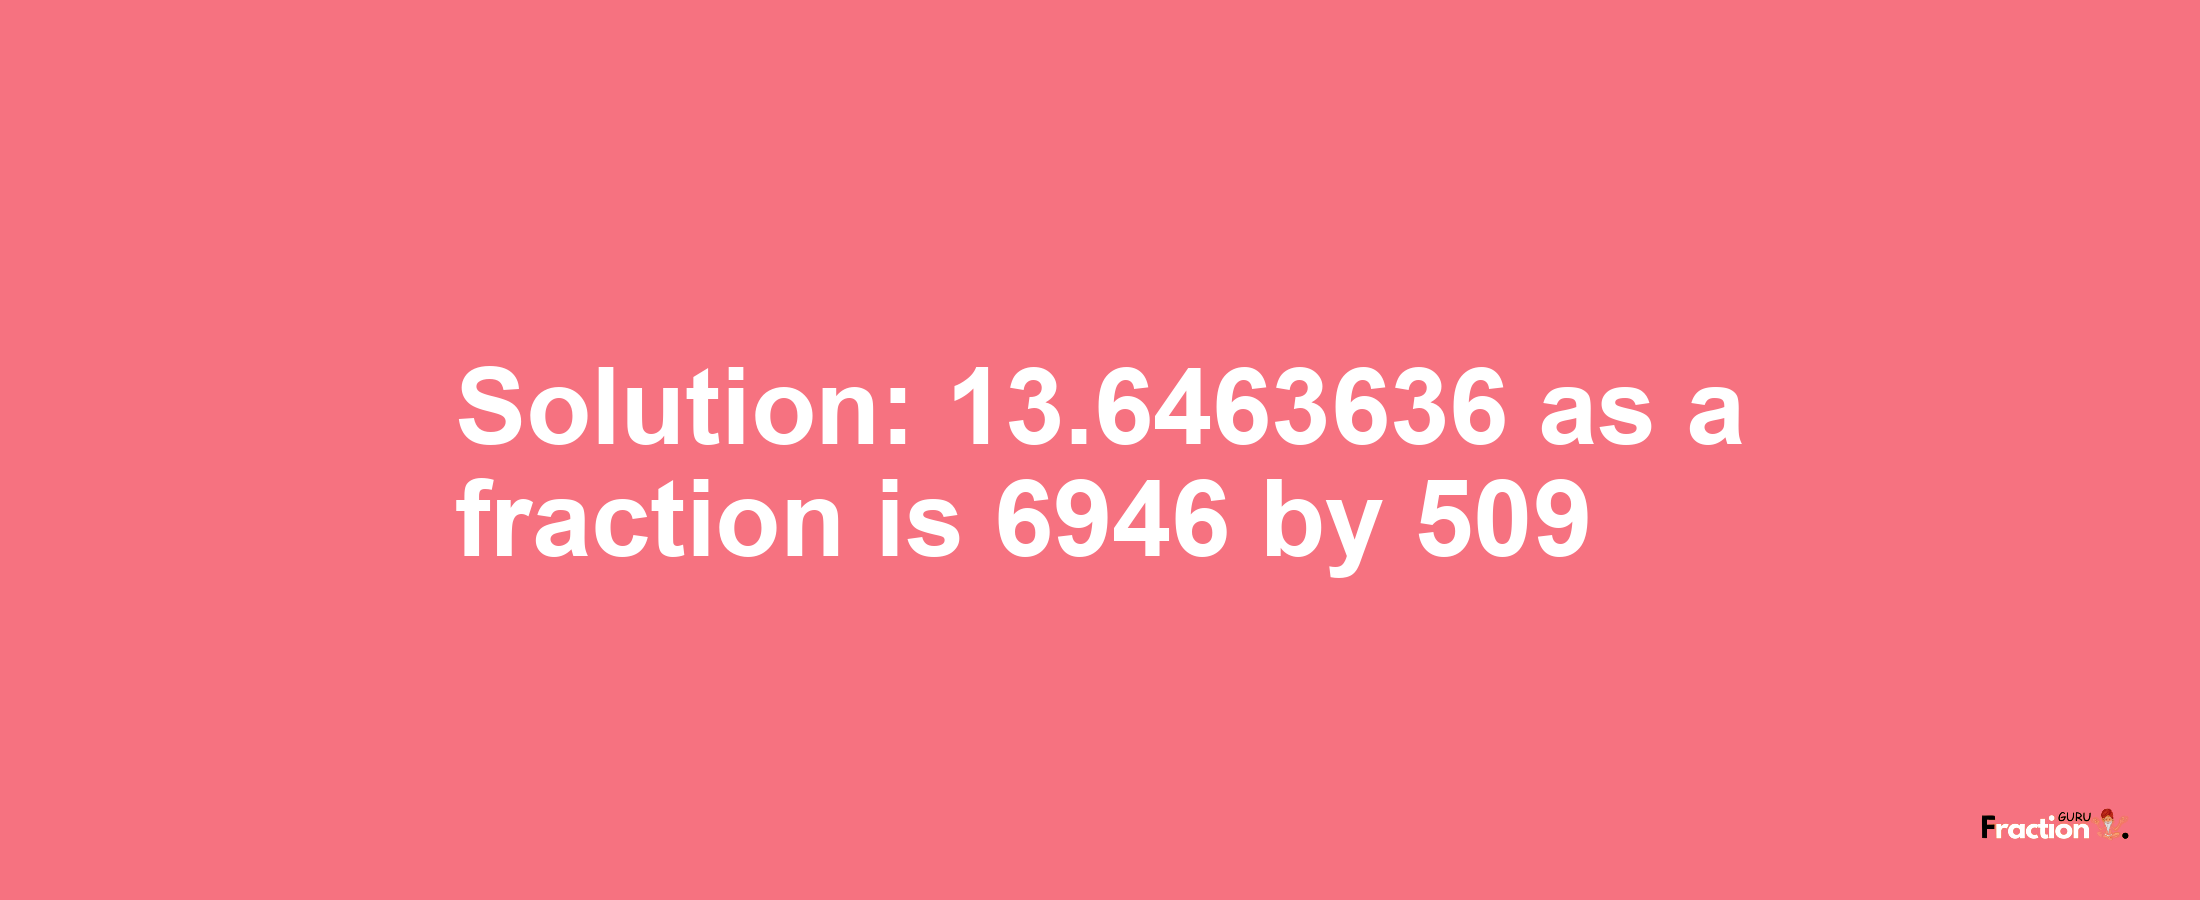 Solution:13.6463636 as a fraction is 6946/509